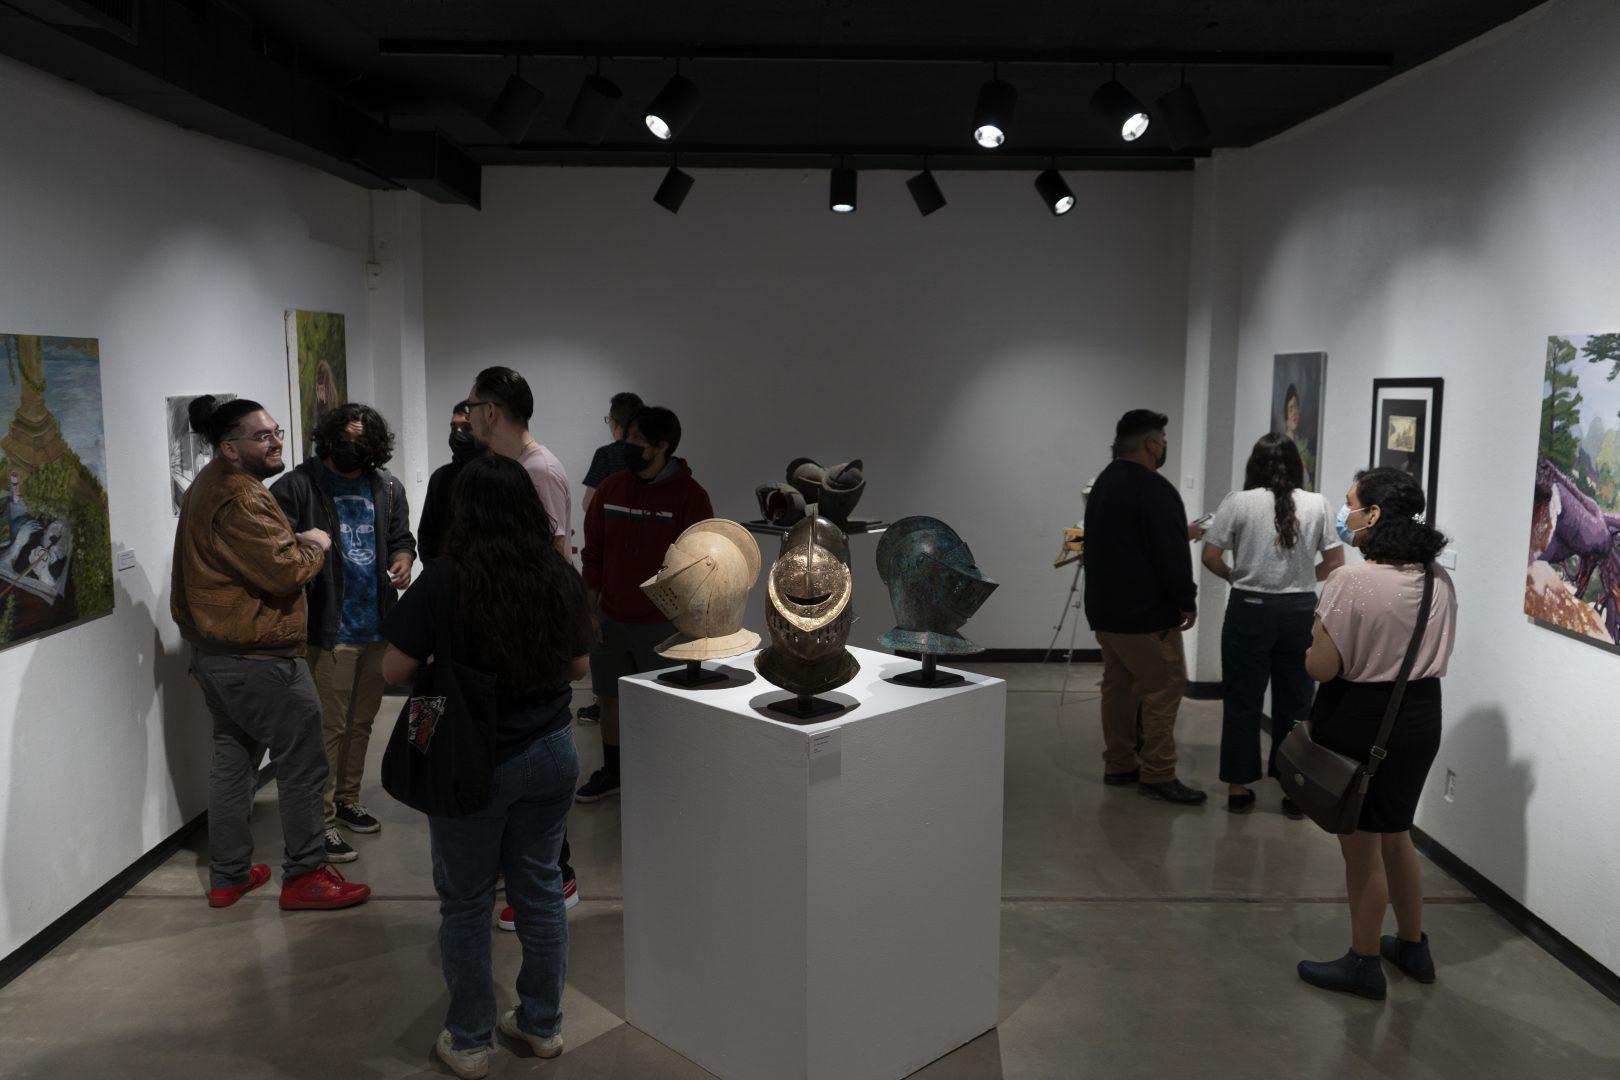 The 2022 Senior Art Show gave an opportunity for senior art students to display and be recognized for their work before graduating. (Wyatt Bible/The Collegian)